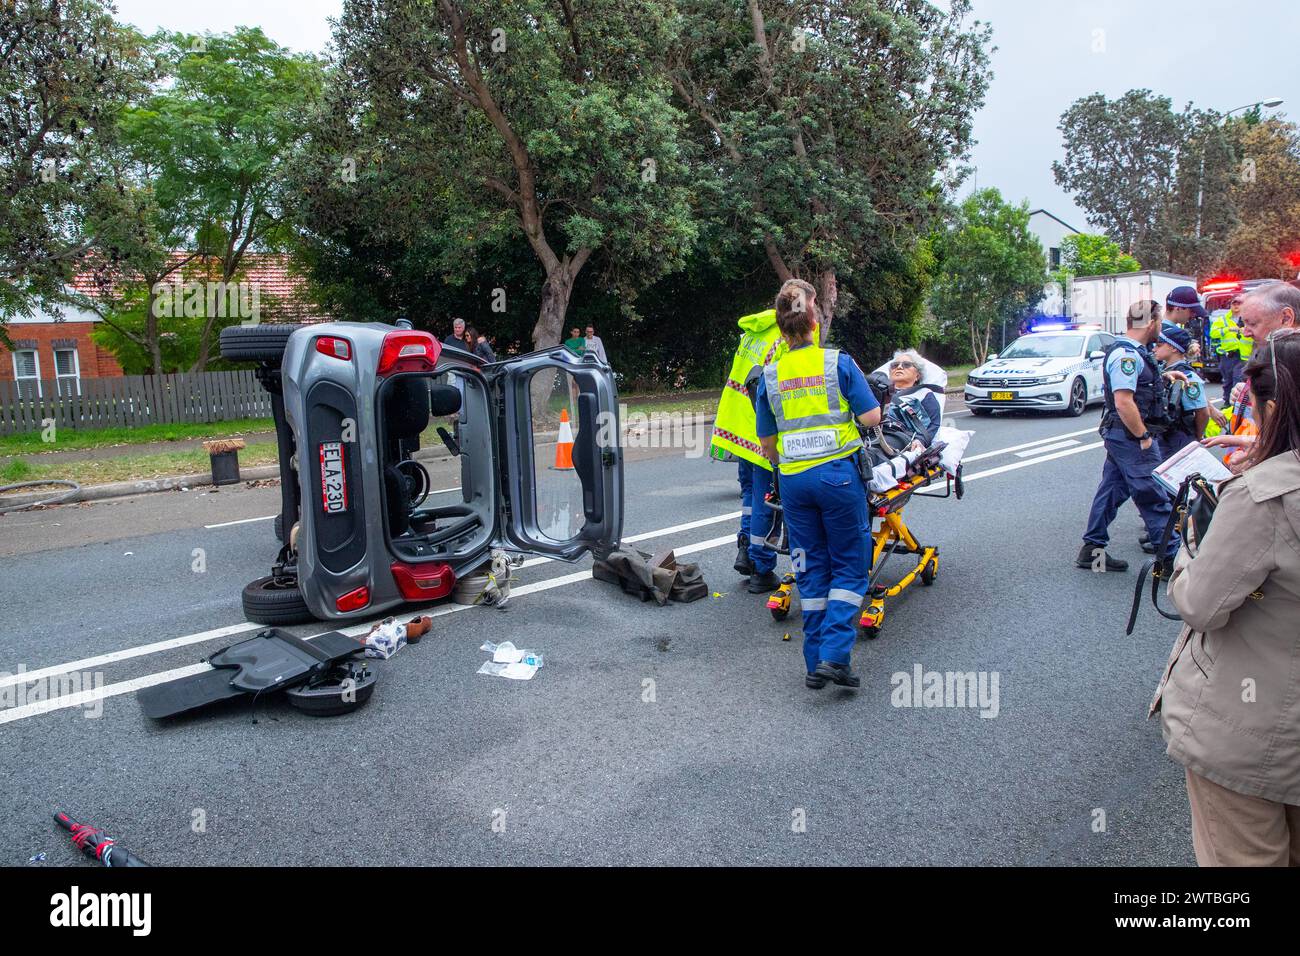 Sydney, Australia. 17 Mar 2024. A dramatic single vehicle accident has occurred on Carrington Road in Waverley in Sydney's Eastern Suburbs after an elderly female driver's car connected with a sloped abutment that sent her car toppling on its side. She was transported to hospital by ambulance workers. The abutment was part of a construction site that has been tasked with the de-construction of Waverley Communication Tower. Stock Photo